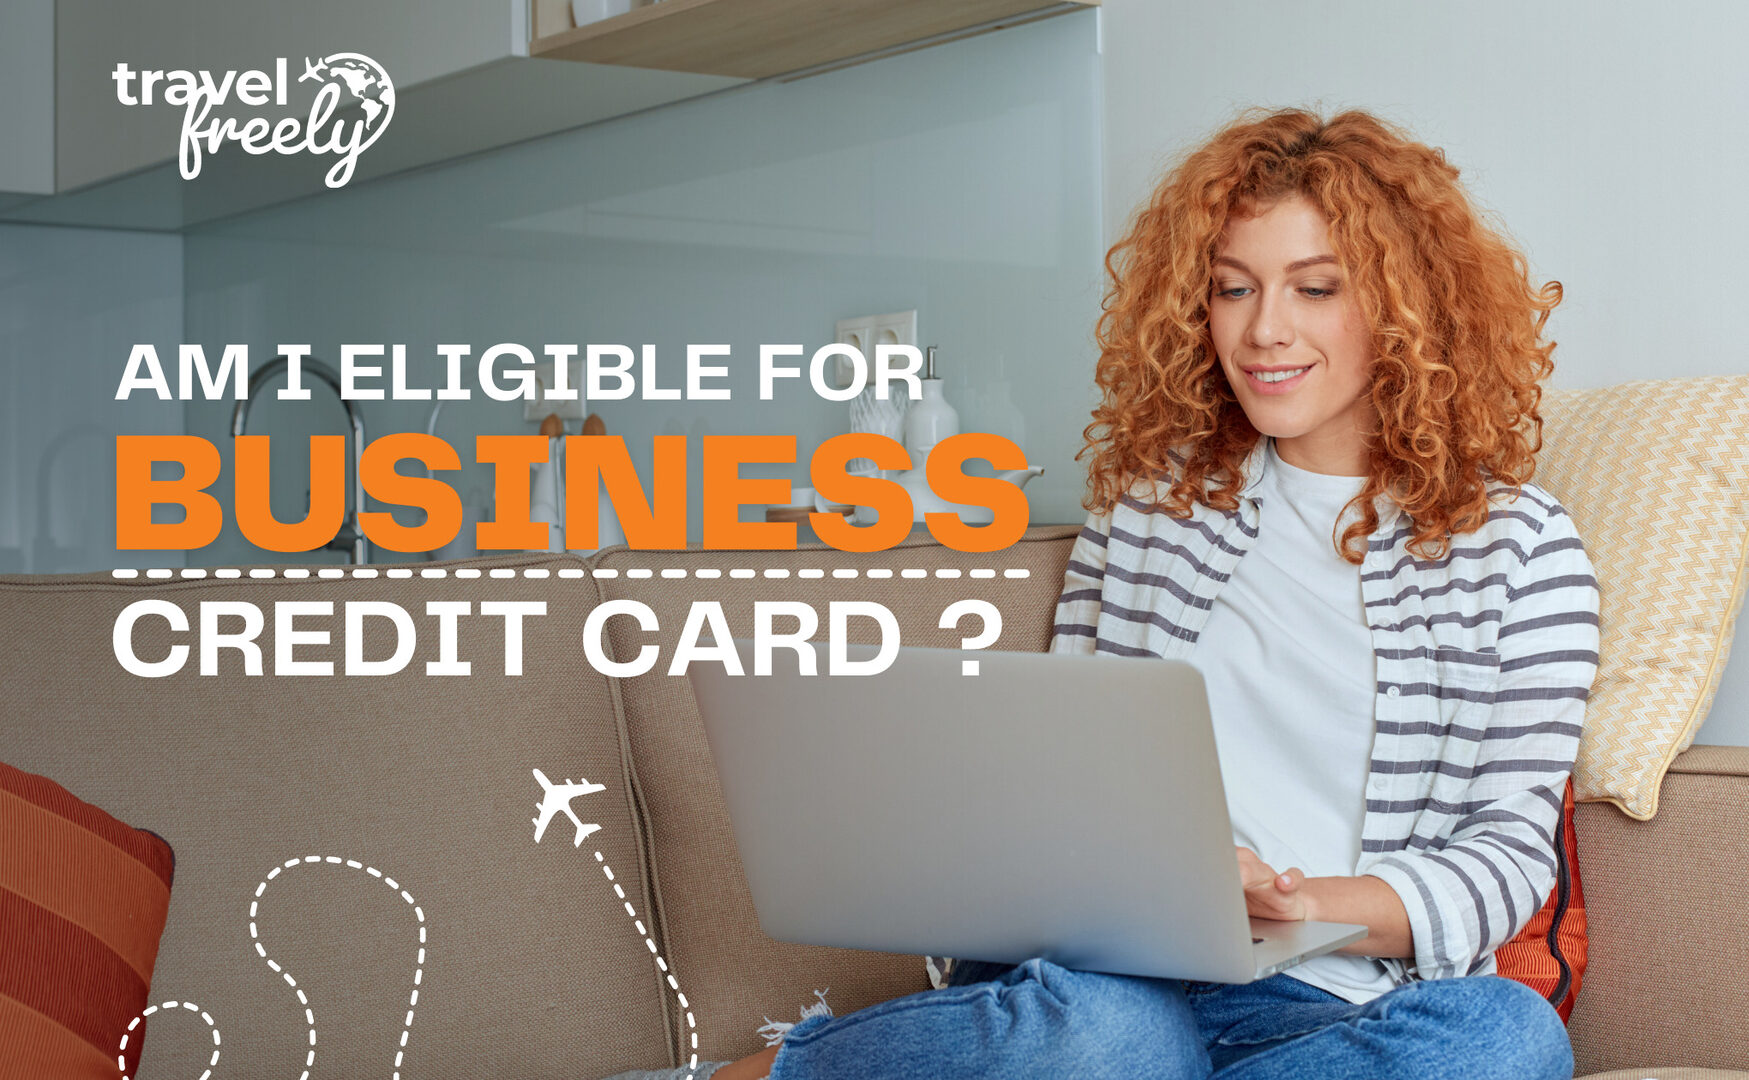 Am I Eligible For a Business Credit Card?